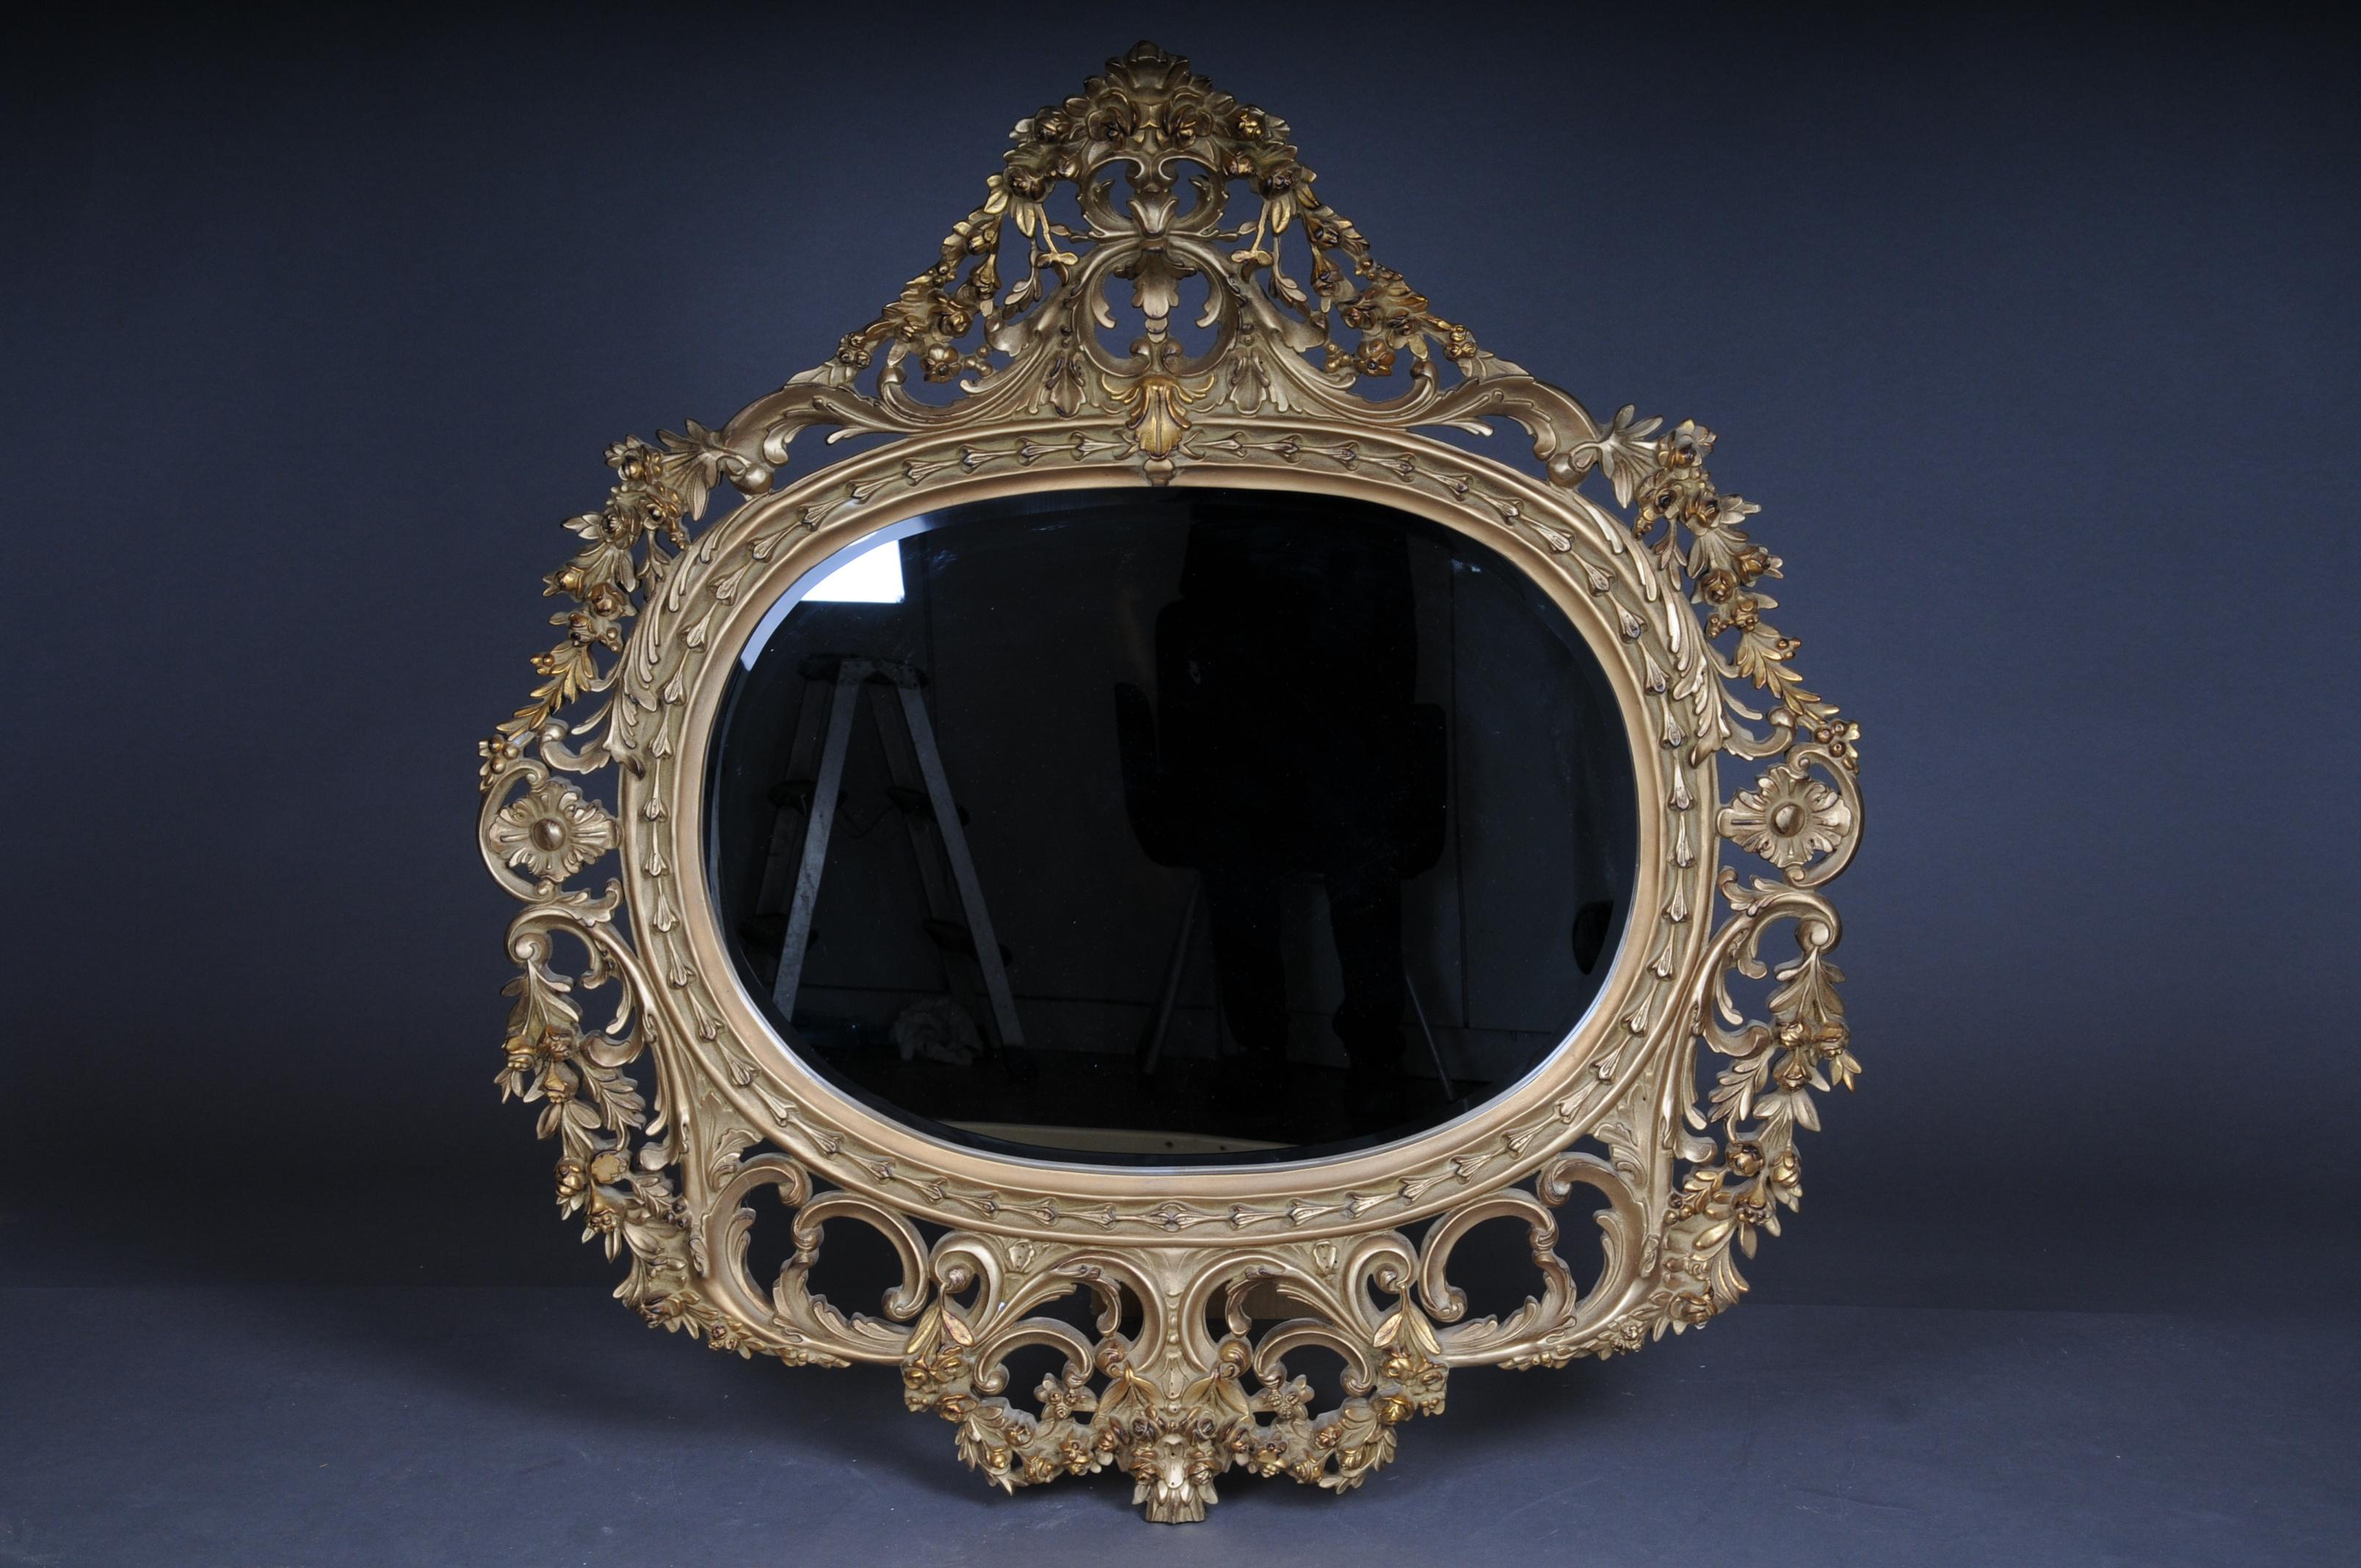 Richly carved royal wall mirror in Louis XV, beech wood gilt

High-quality wall mirror with rich hand carving, gilded. Oval body with a high crown.

Solid beech wood body with framed oval mirror.